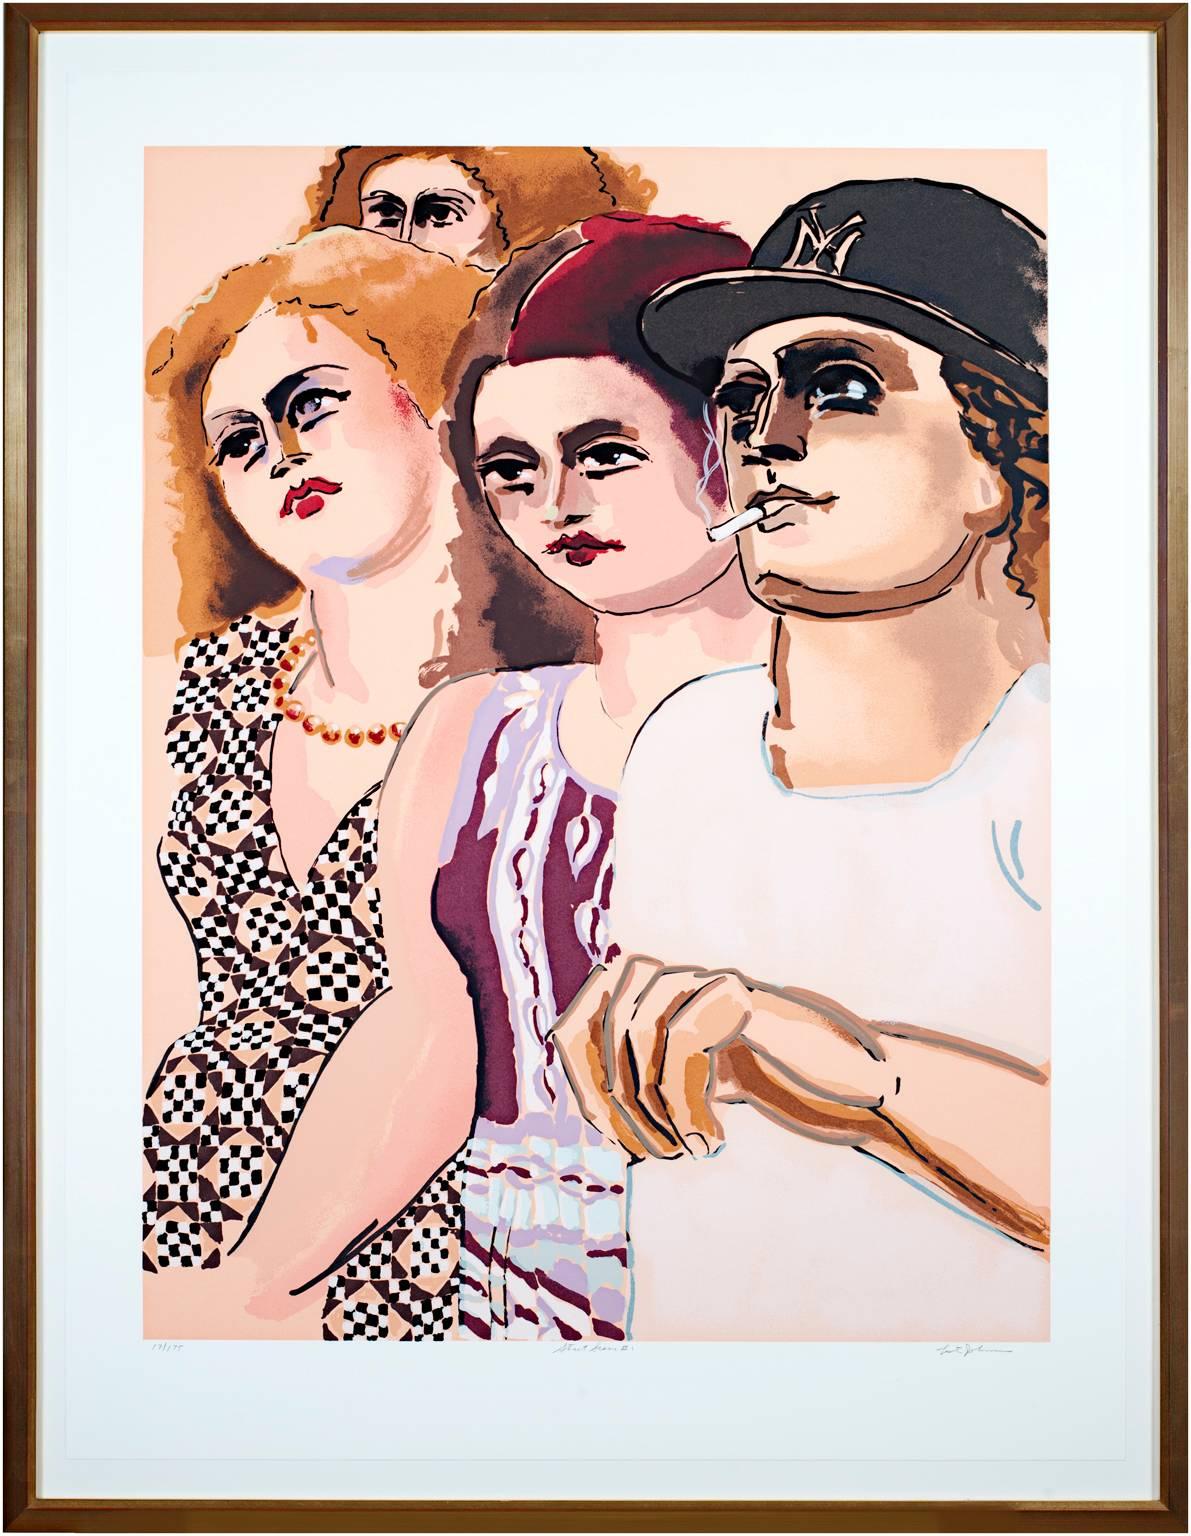 The present work is an original screen print signed by Lester Johnson, from his 'Street Scene Portfolio.' It features four figures, all wearing fashionable street clothing emblematic of youth culture and life. Johnson's use of color and his